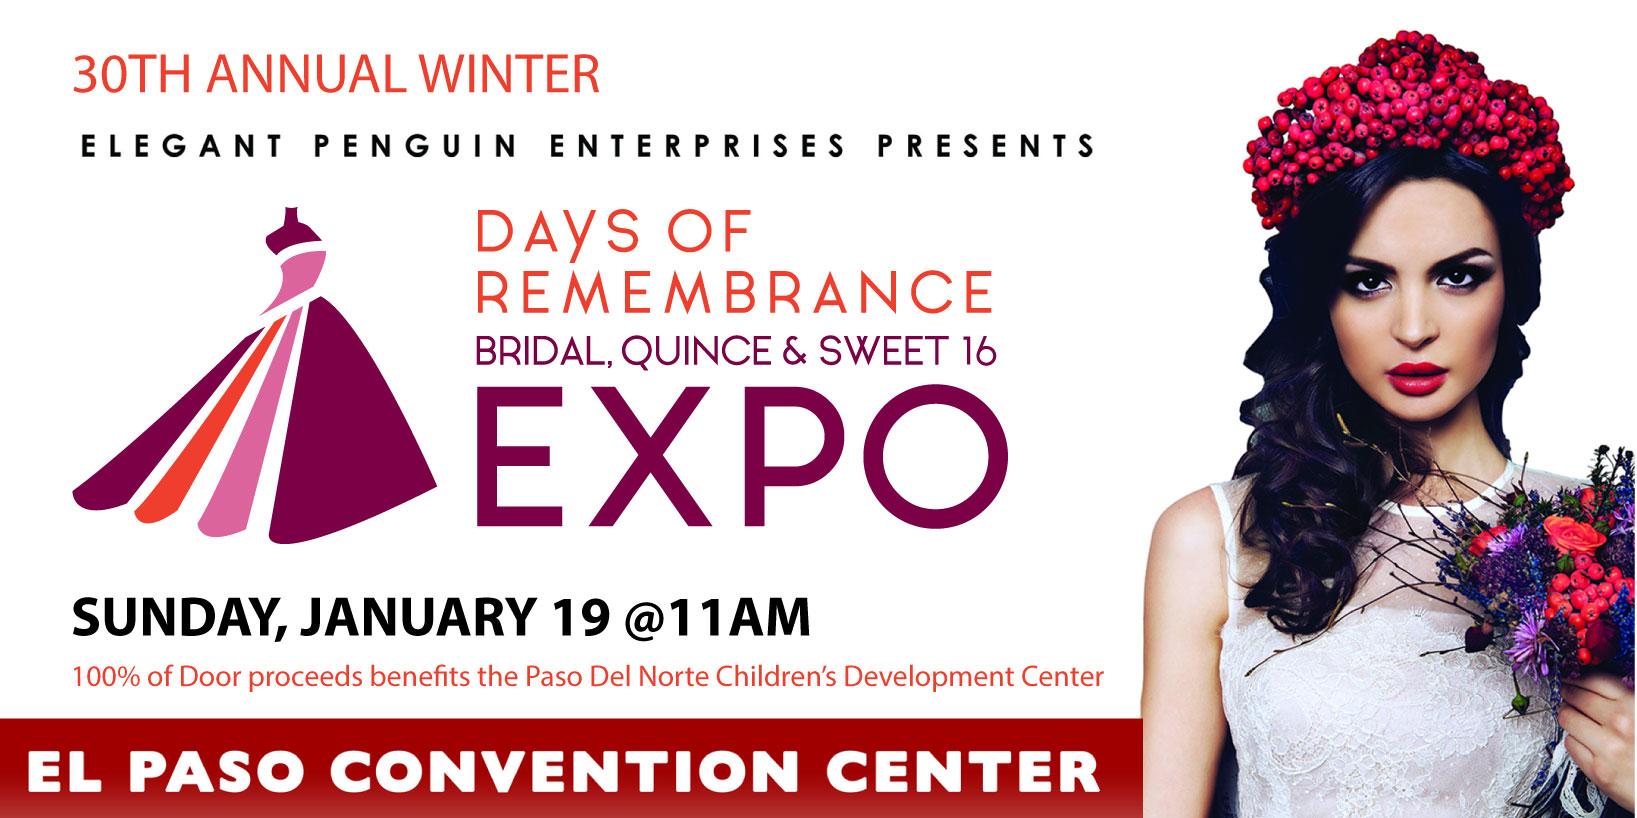 Days of Remembrance - Bridal, Quince and Sweet 16 Expo - Jan 19, 2020